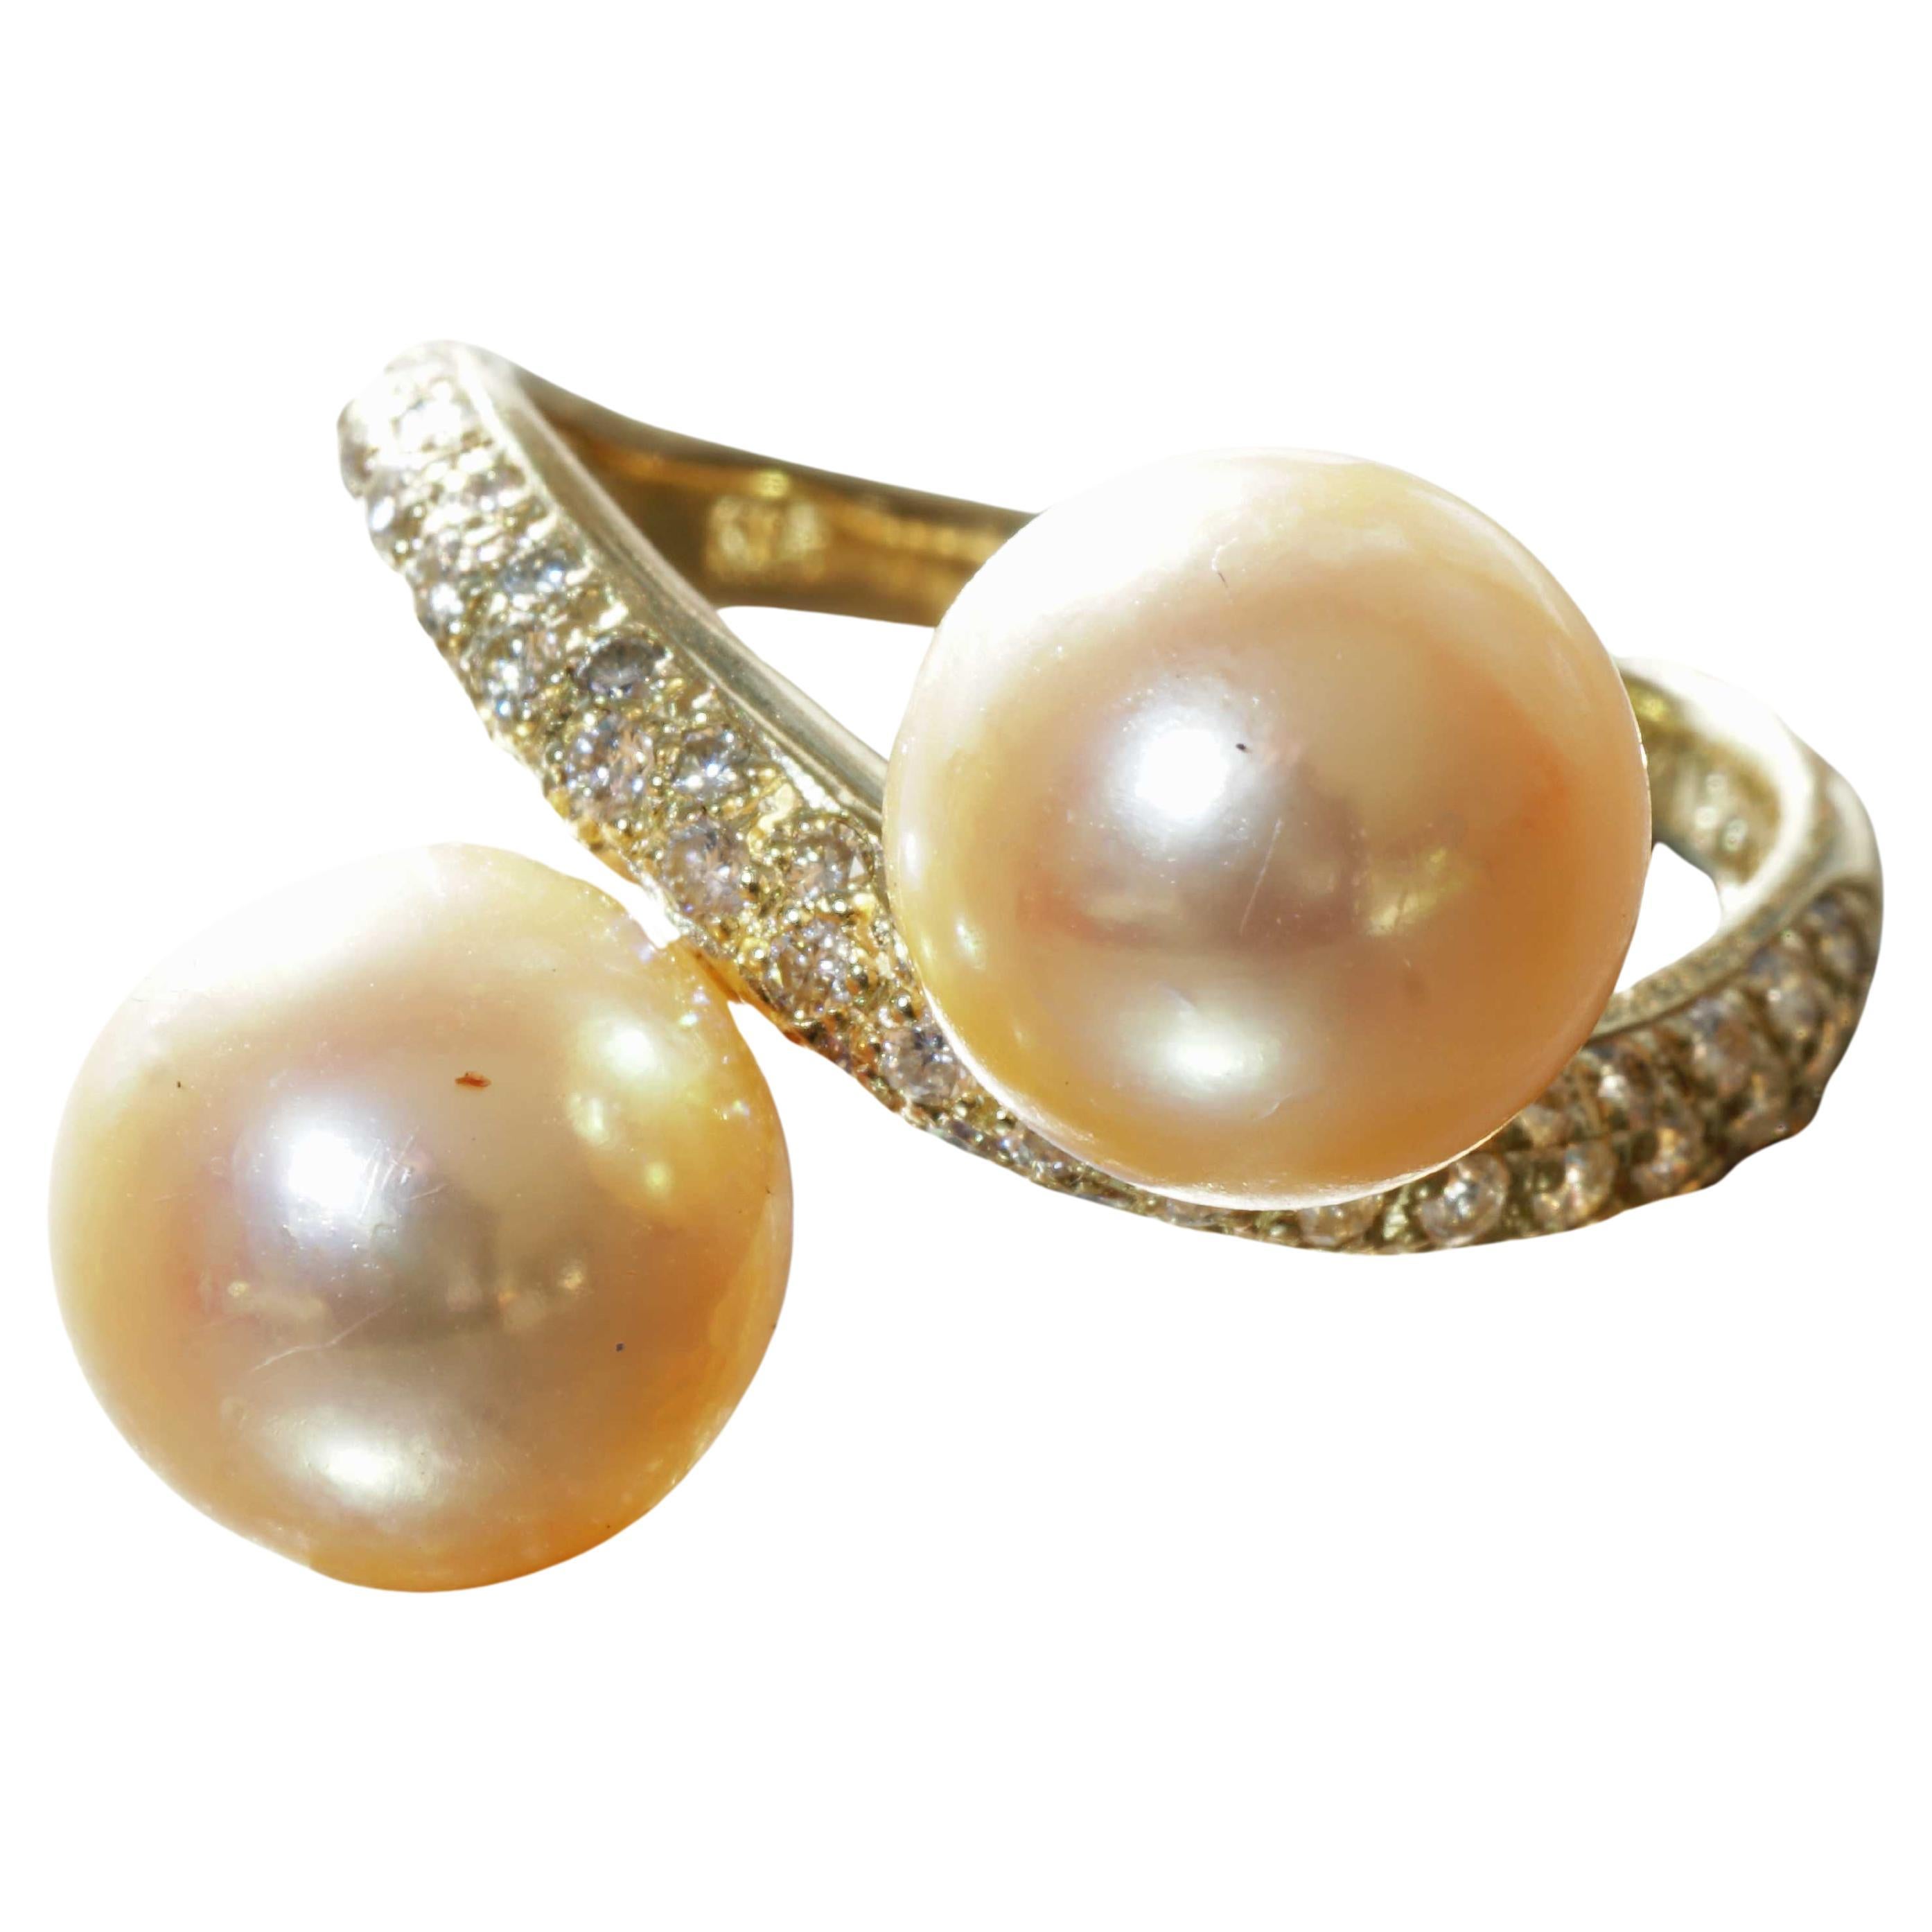 ...elegant style, solidly crafted ring with gold-colored South Sea cultured pearls of 9.3 and 9.6 mm diameter. AAA+ fine luster, and ring shoulders pavee set with full-cut brilliant-cut diamonds totaling approx. 0.51 ct, W (white) / VS-SI (very